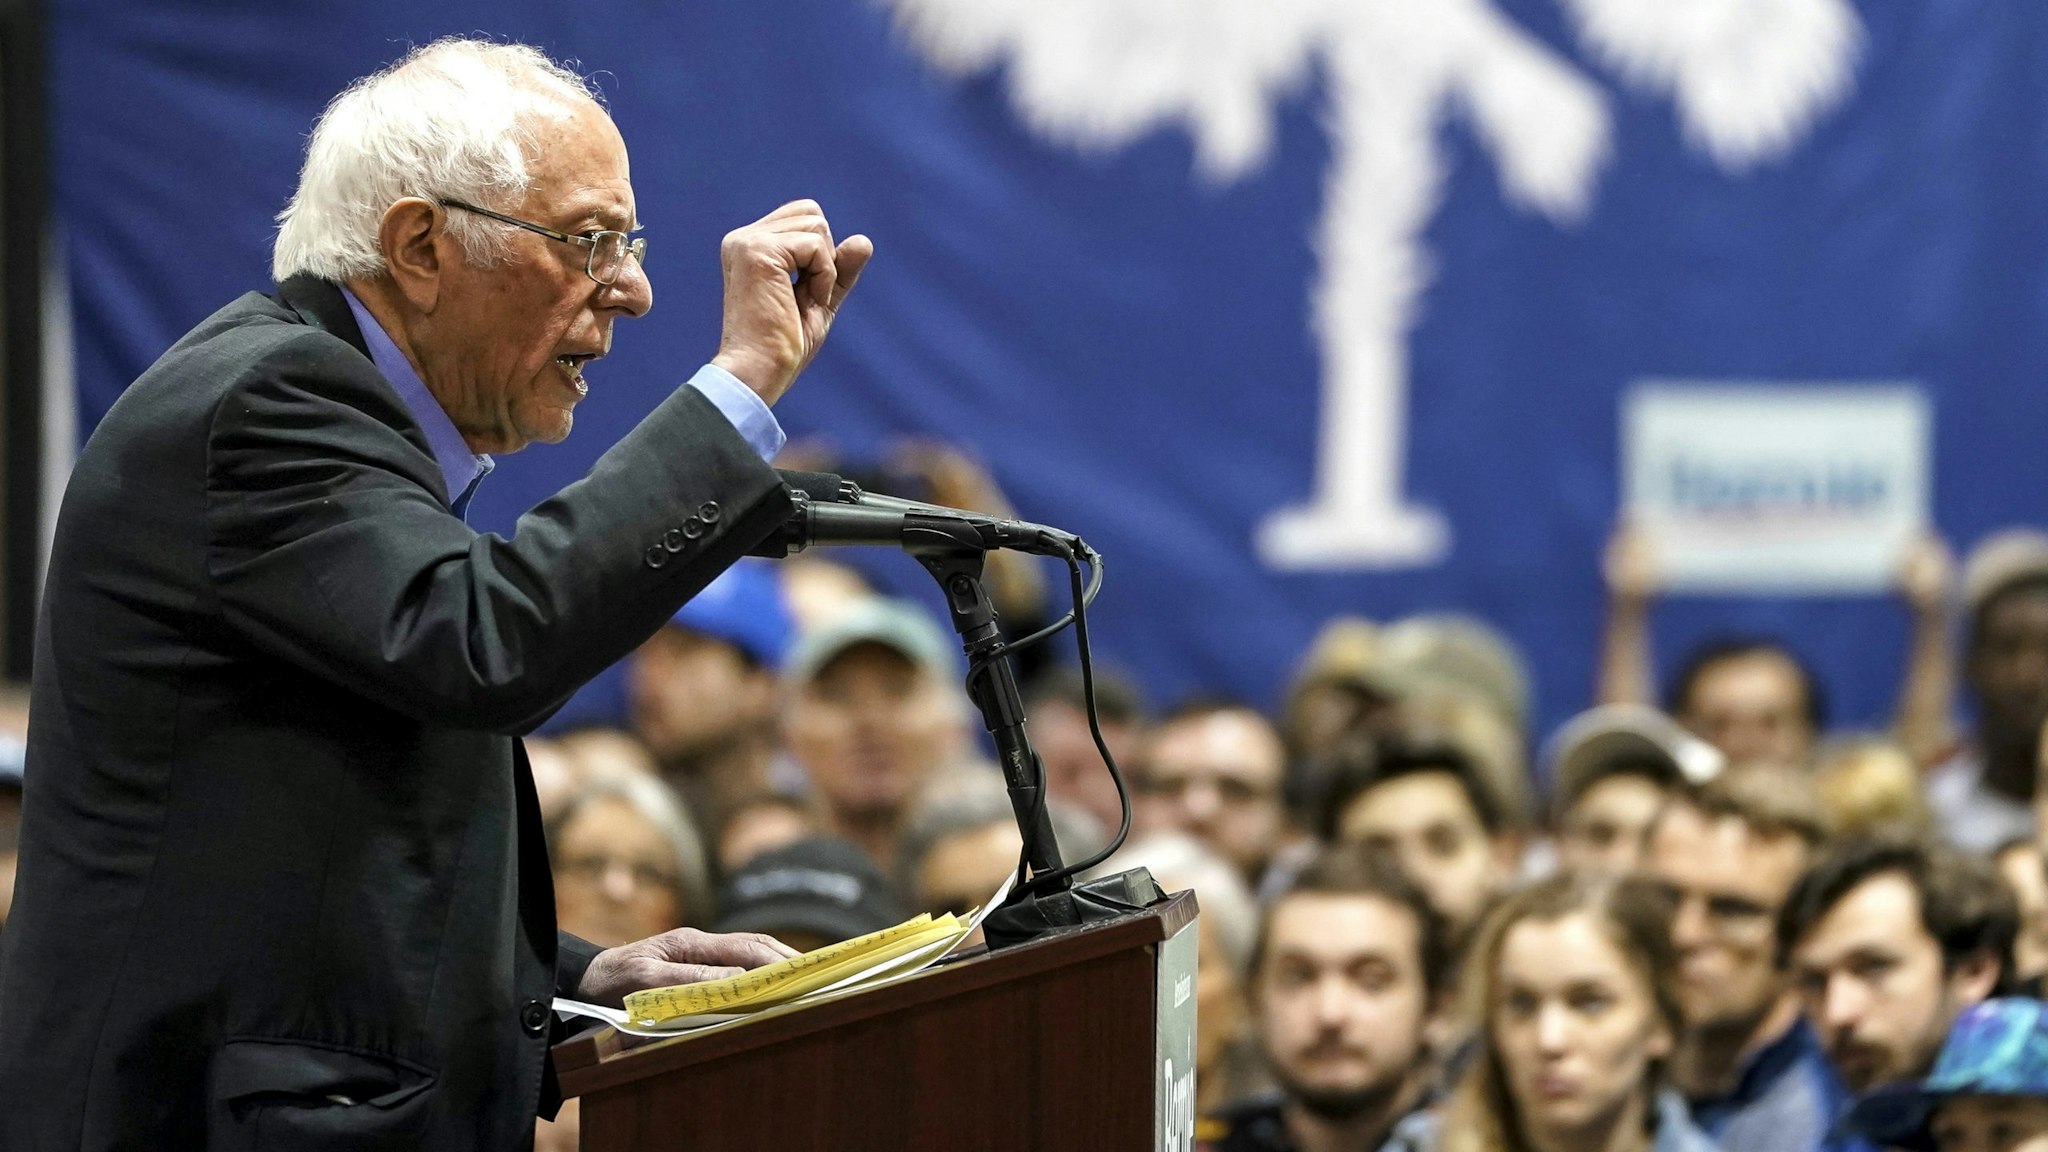 NORTH CHARLESTON, SC - FEBRUARY 26: Democratic presidential candidate Sen. Bernie Sanders (I-VT) speaks during a campaign rally at the Charleston Area Convention Center on February 26, 2020 in North Charleston, South Carolina. South Carolina holds its Democratic presidential primary on Saturday, February 29.